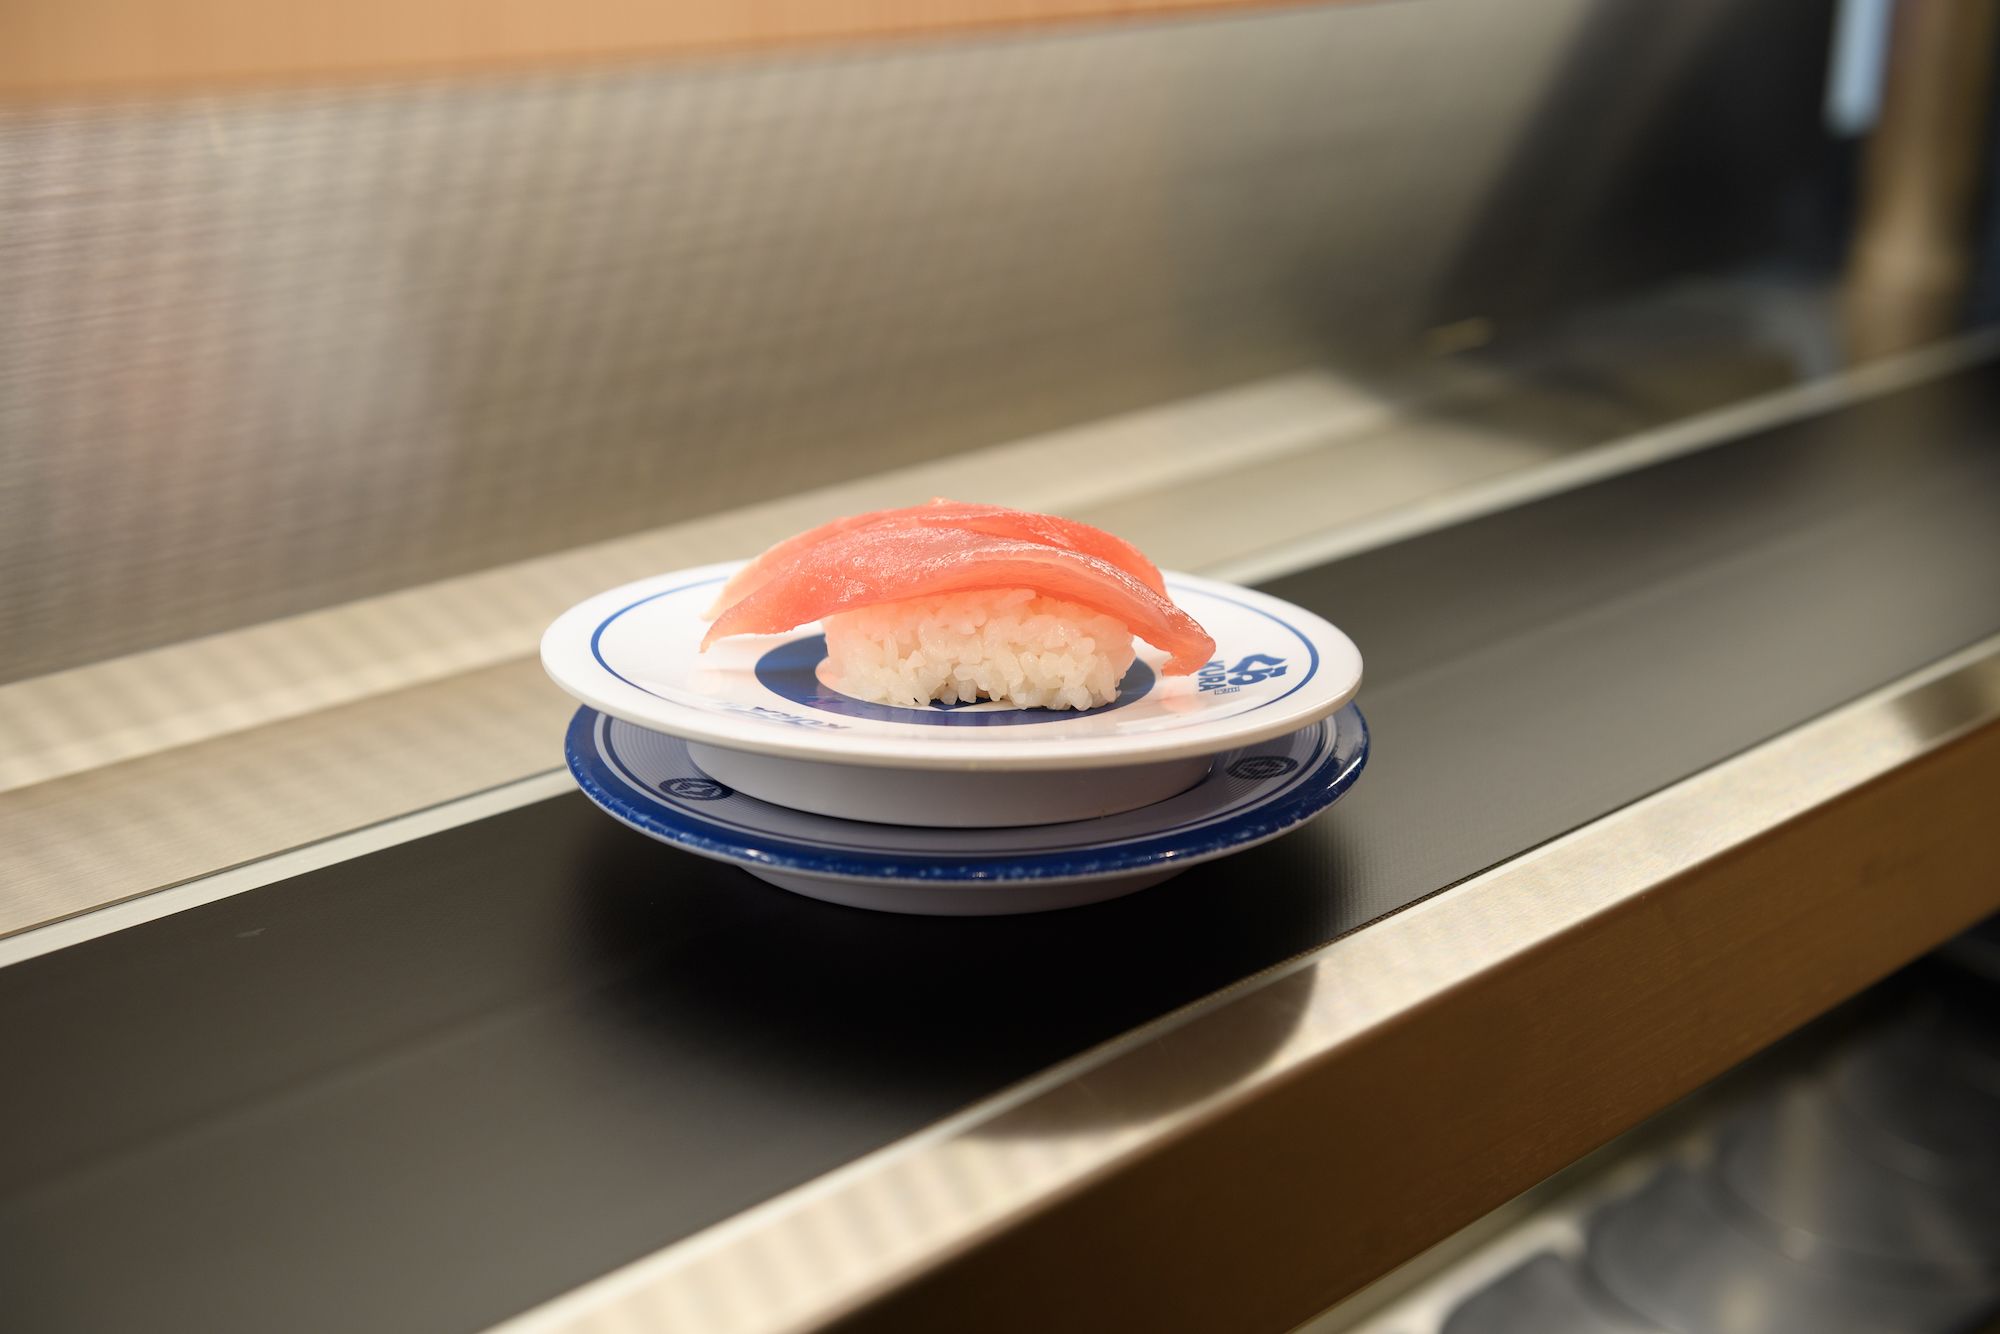 We've Been Eating Sushi Wrong Our Whole Lives According To This Hack